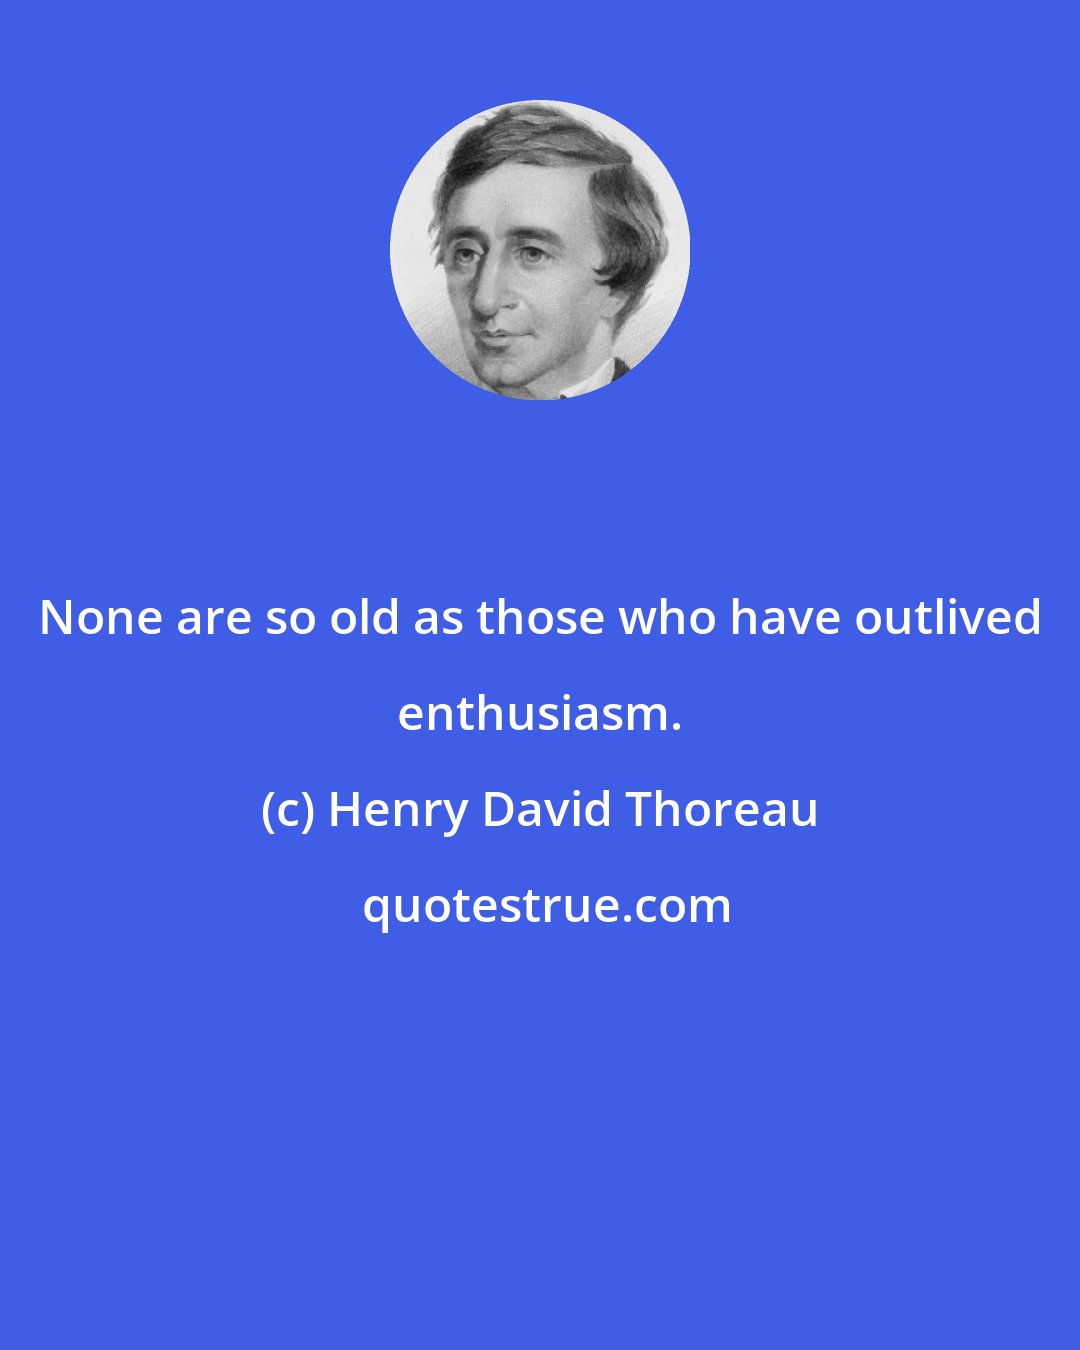 Henry David Thoreau: None are so old as those who have outlived enthusiasm.